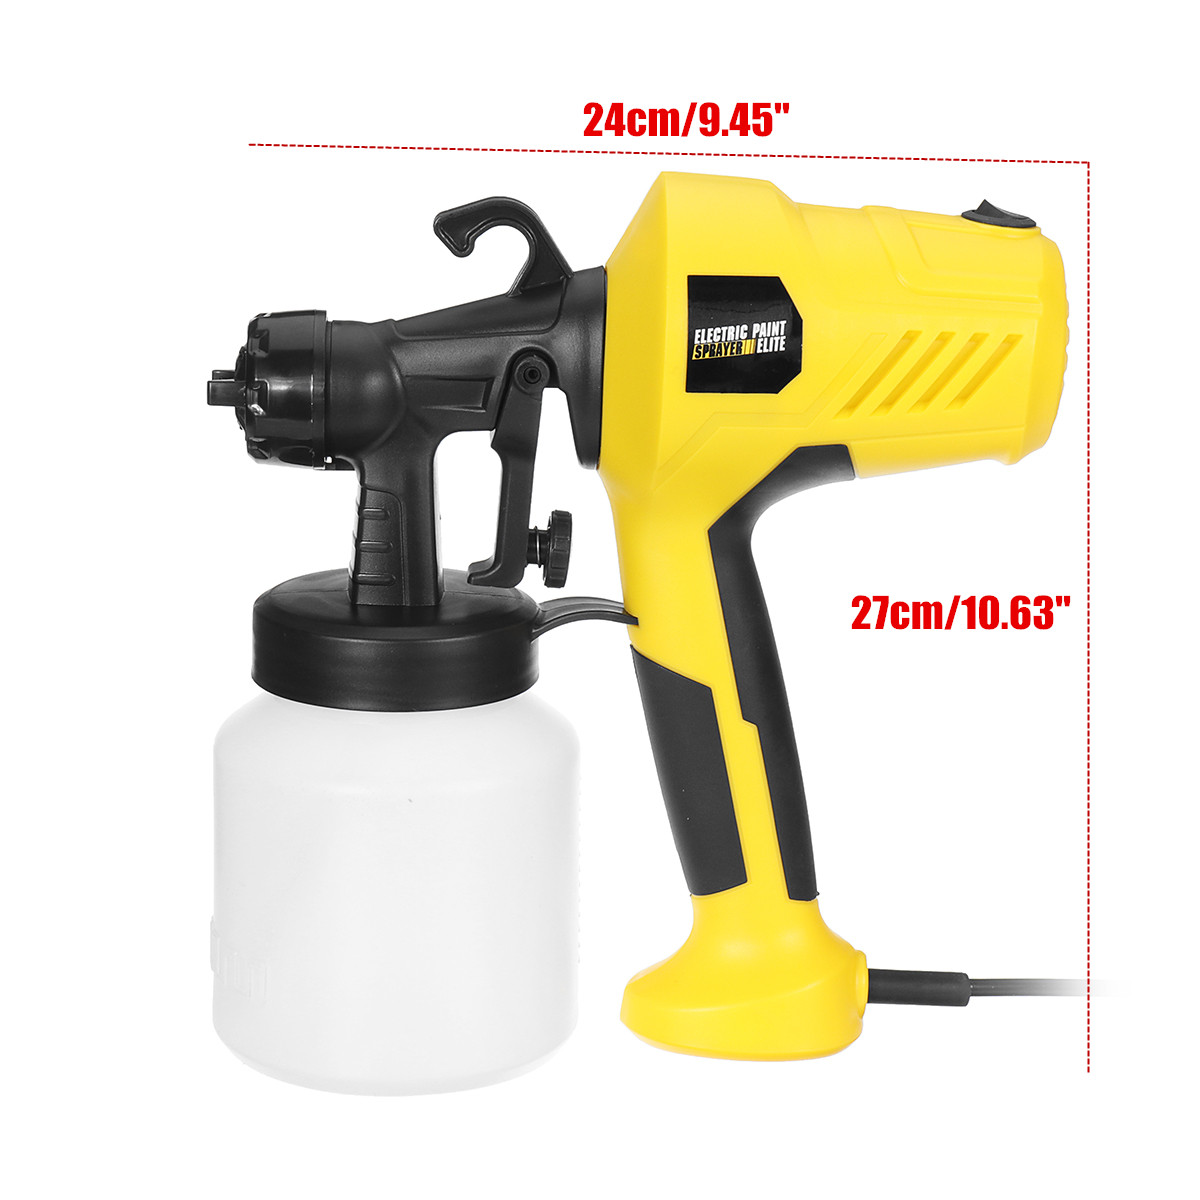 600W Electric Spray Paint Sprayer For Cars Wood Furniture Wall Woodworking 15